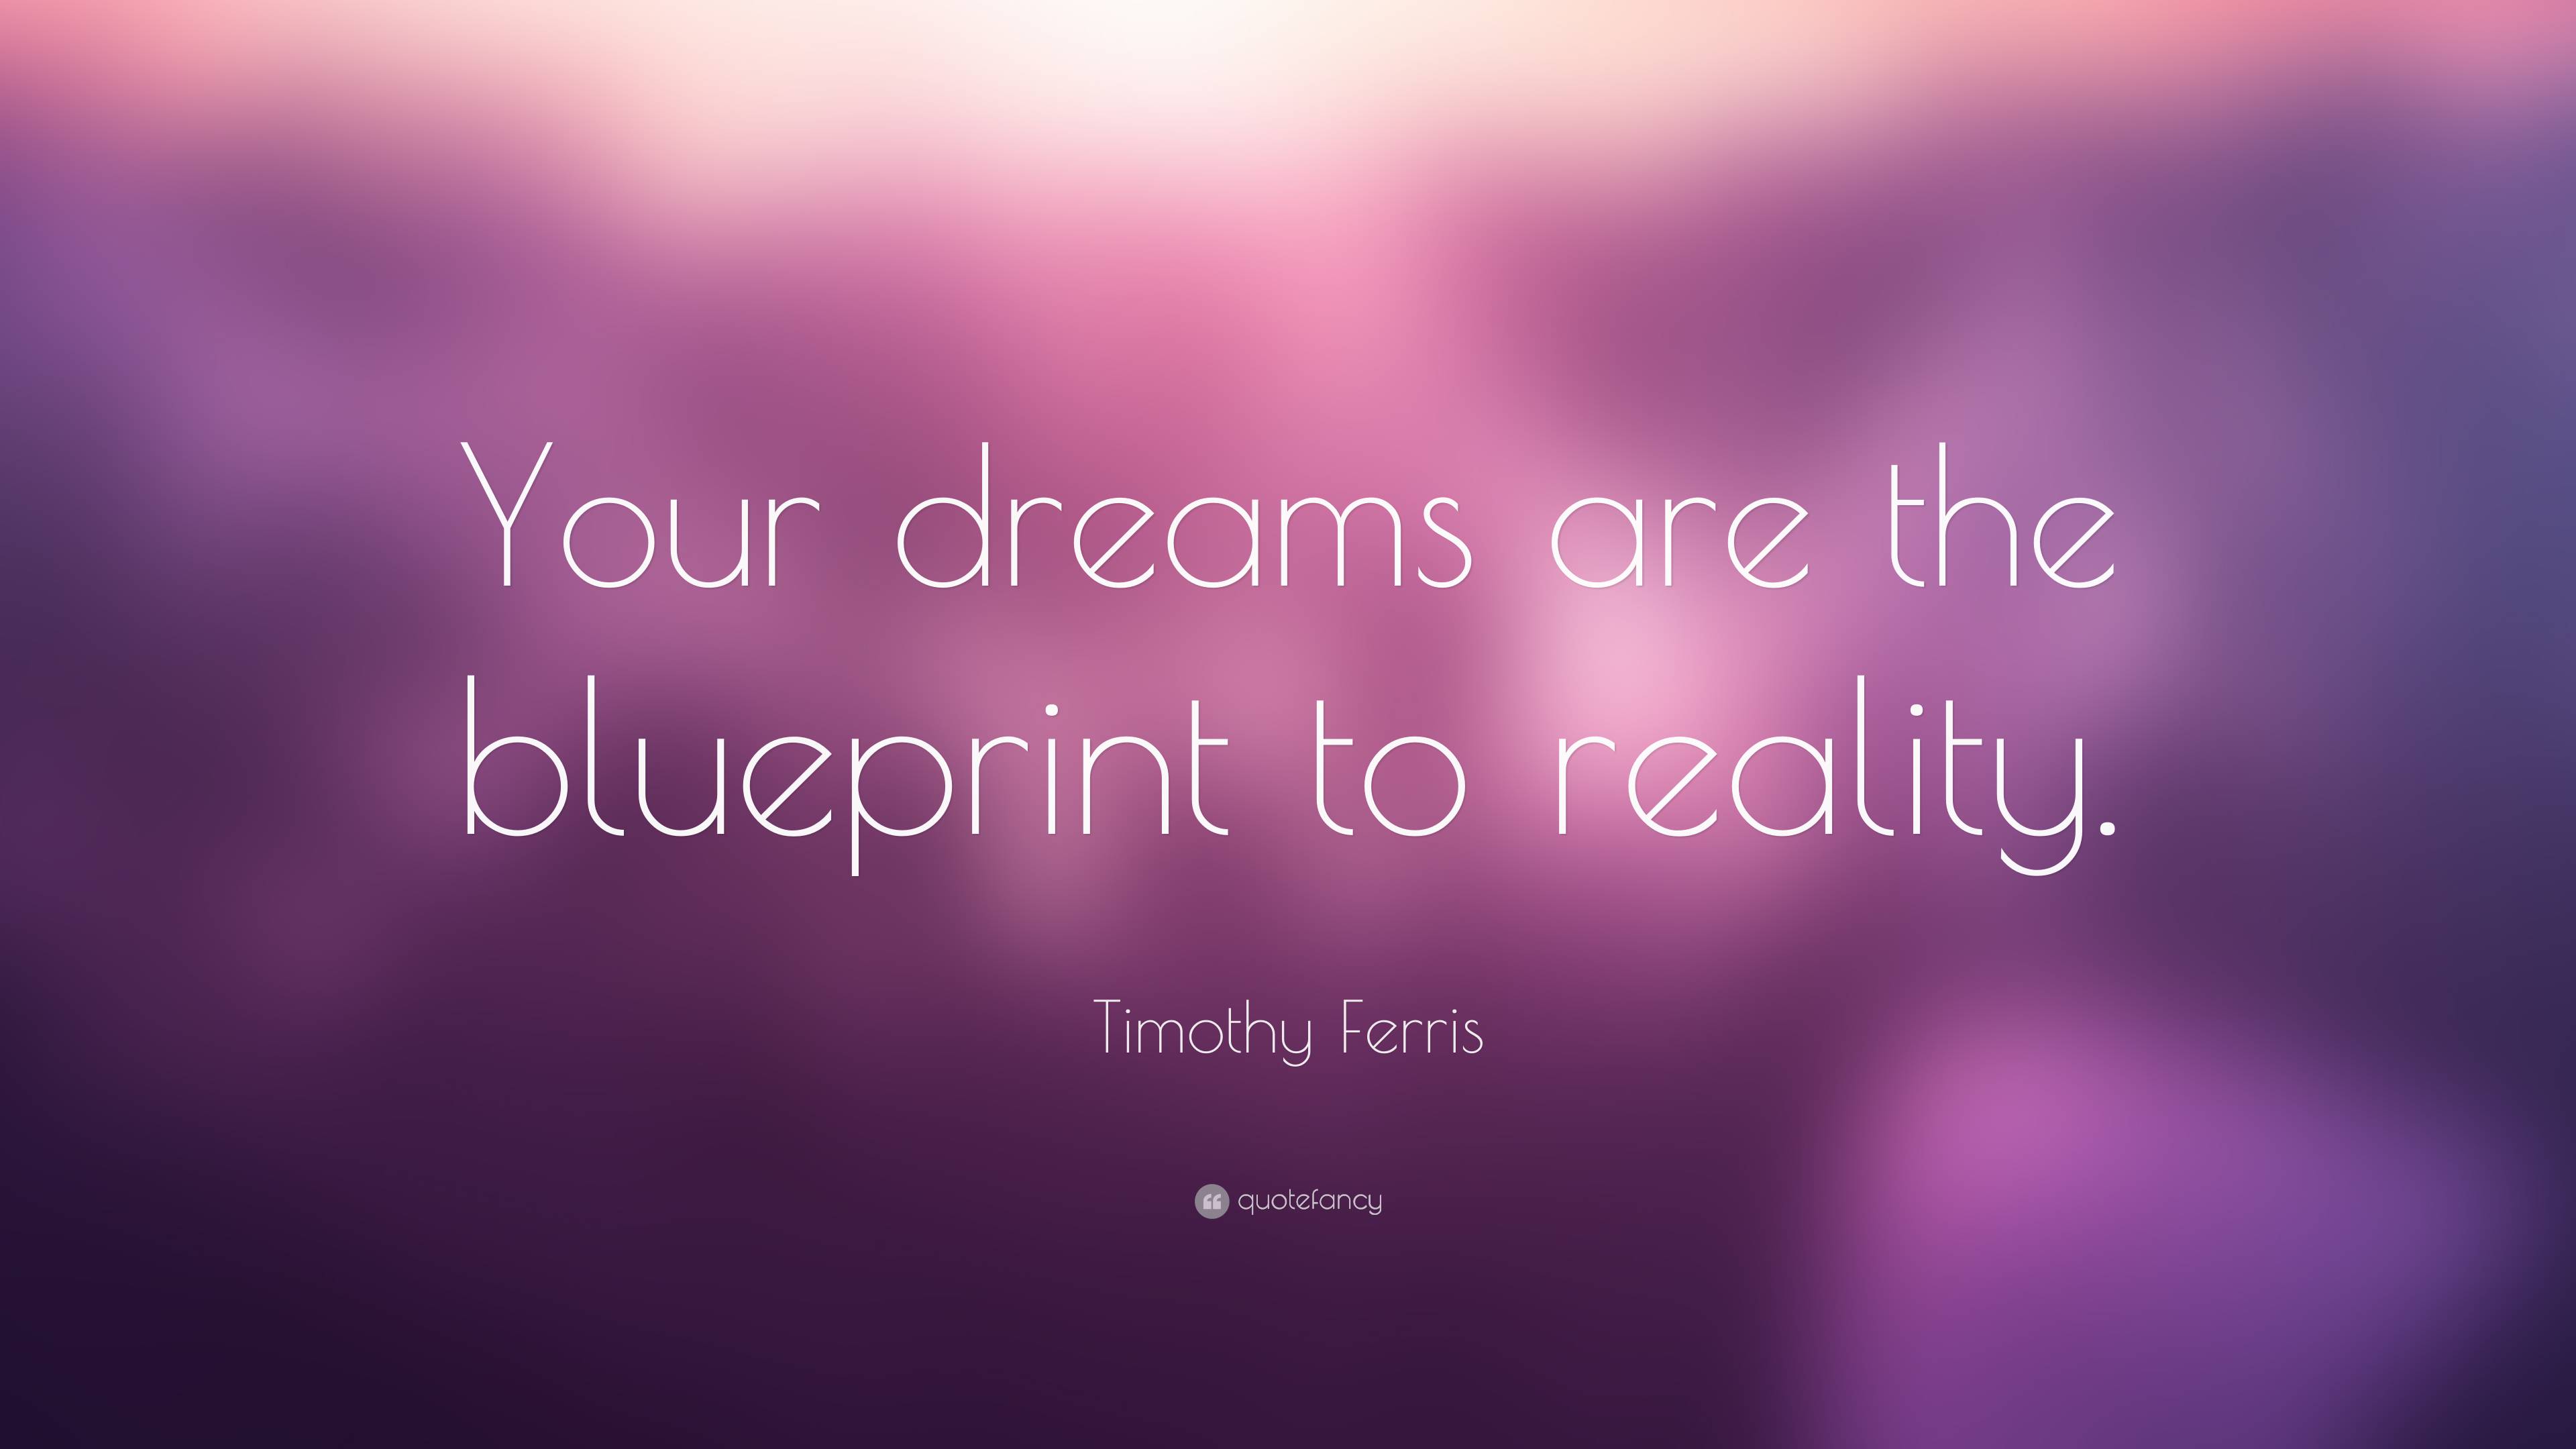 Timothy Ferris Quote: “Your dreams are the blueprint to reality.”